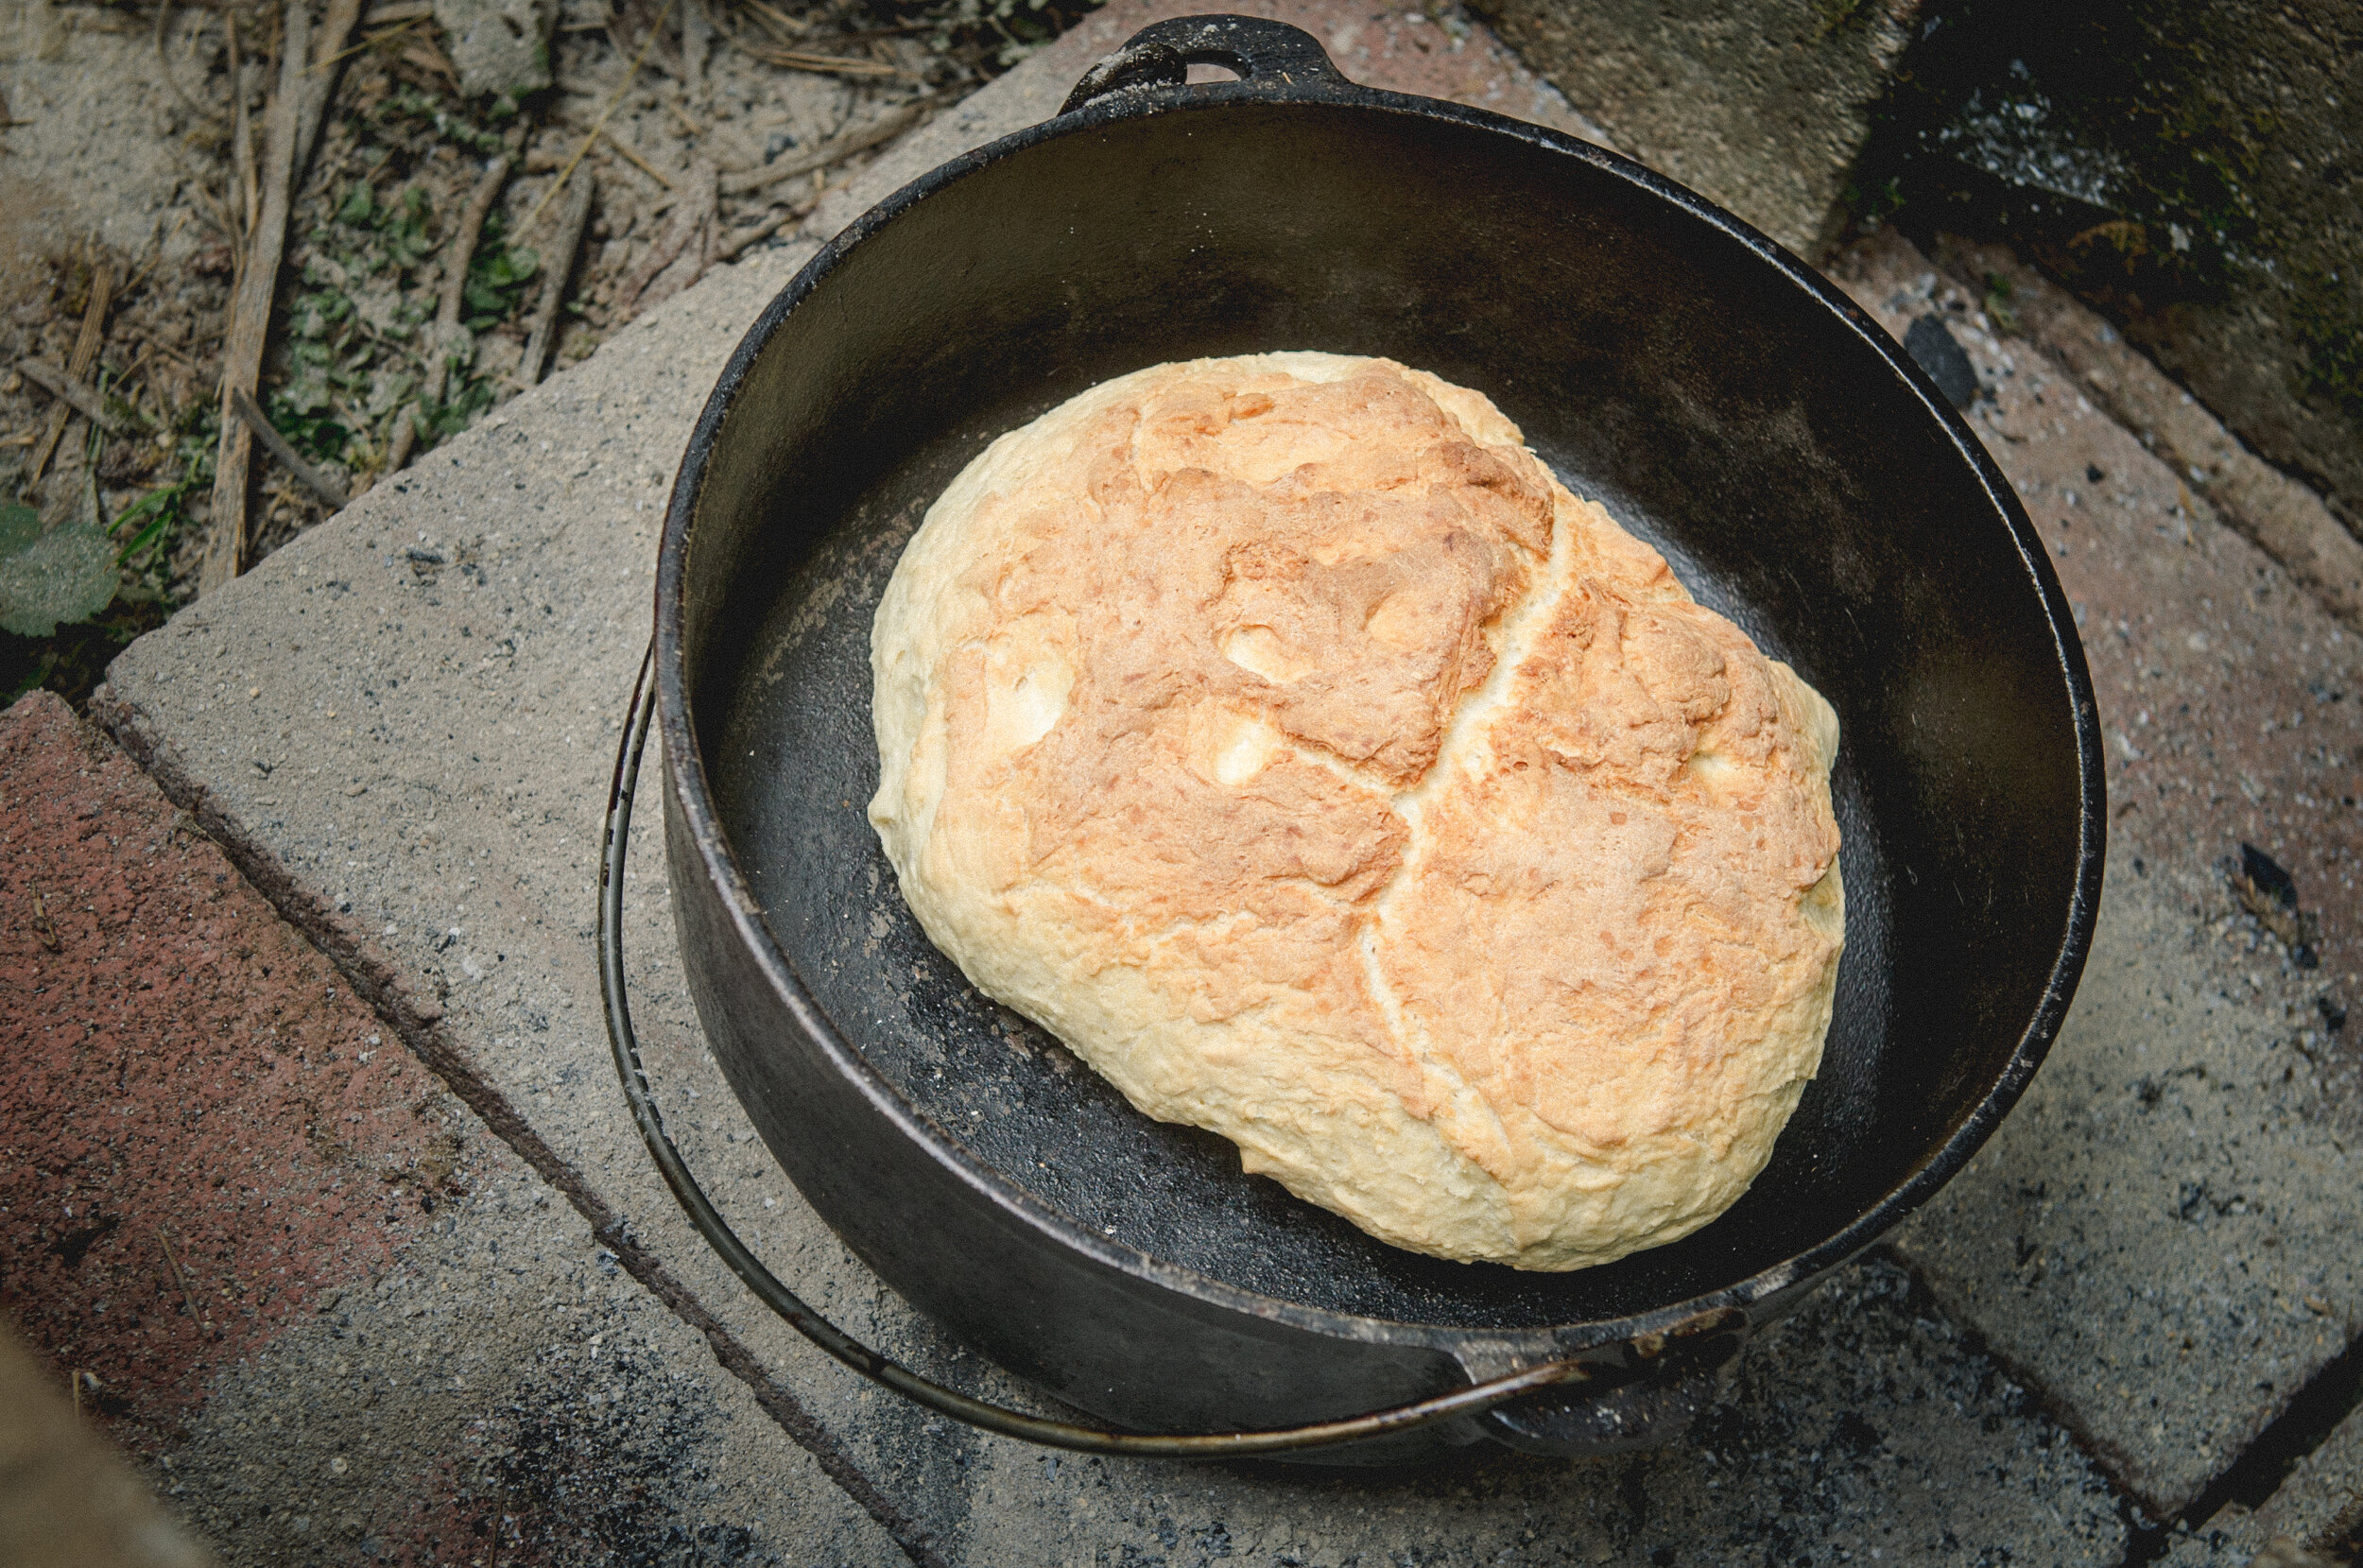 Rustic Dutch Oven Bread Baked on the Grill - 1840 Farm